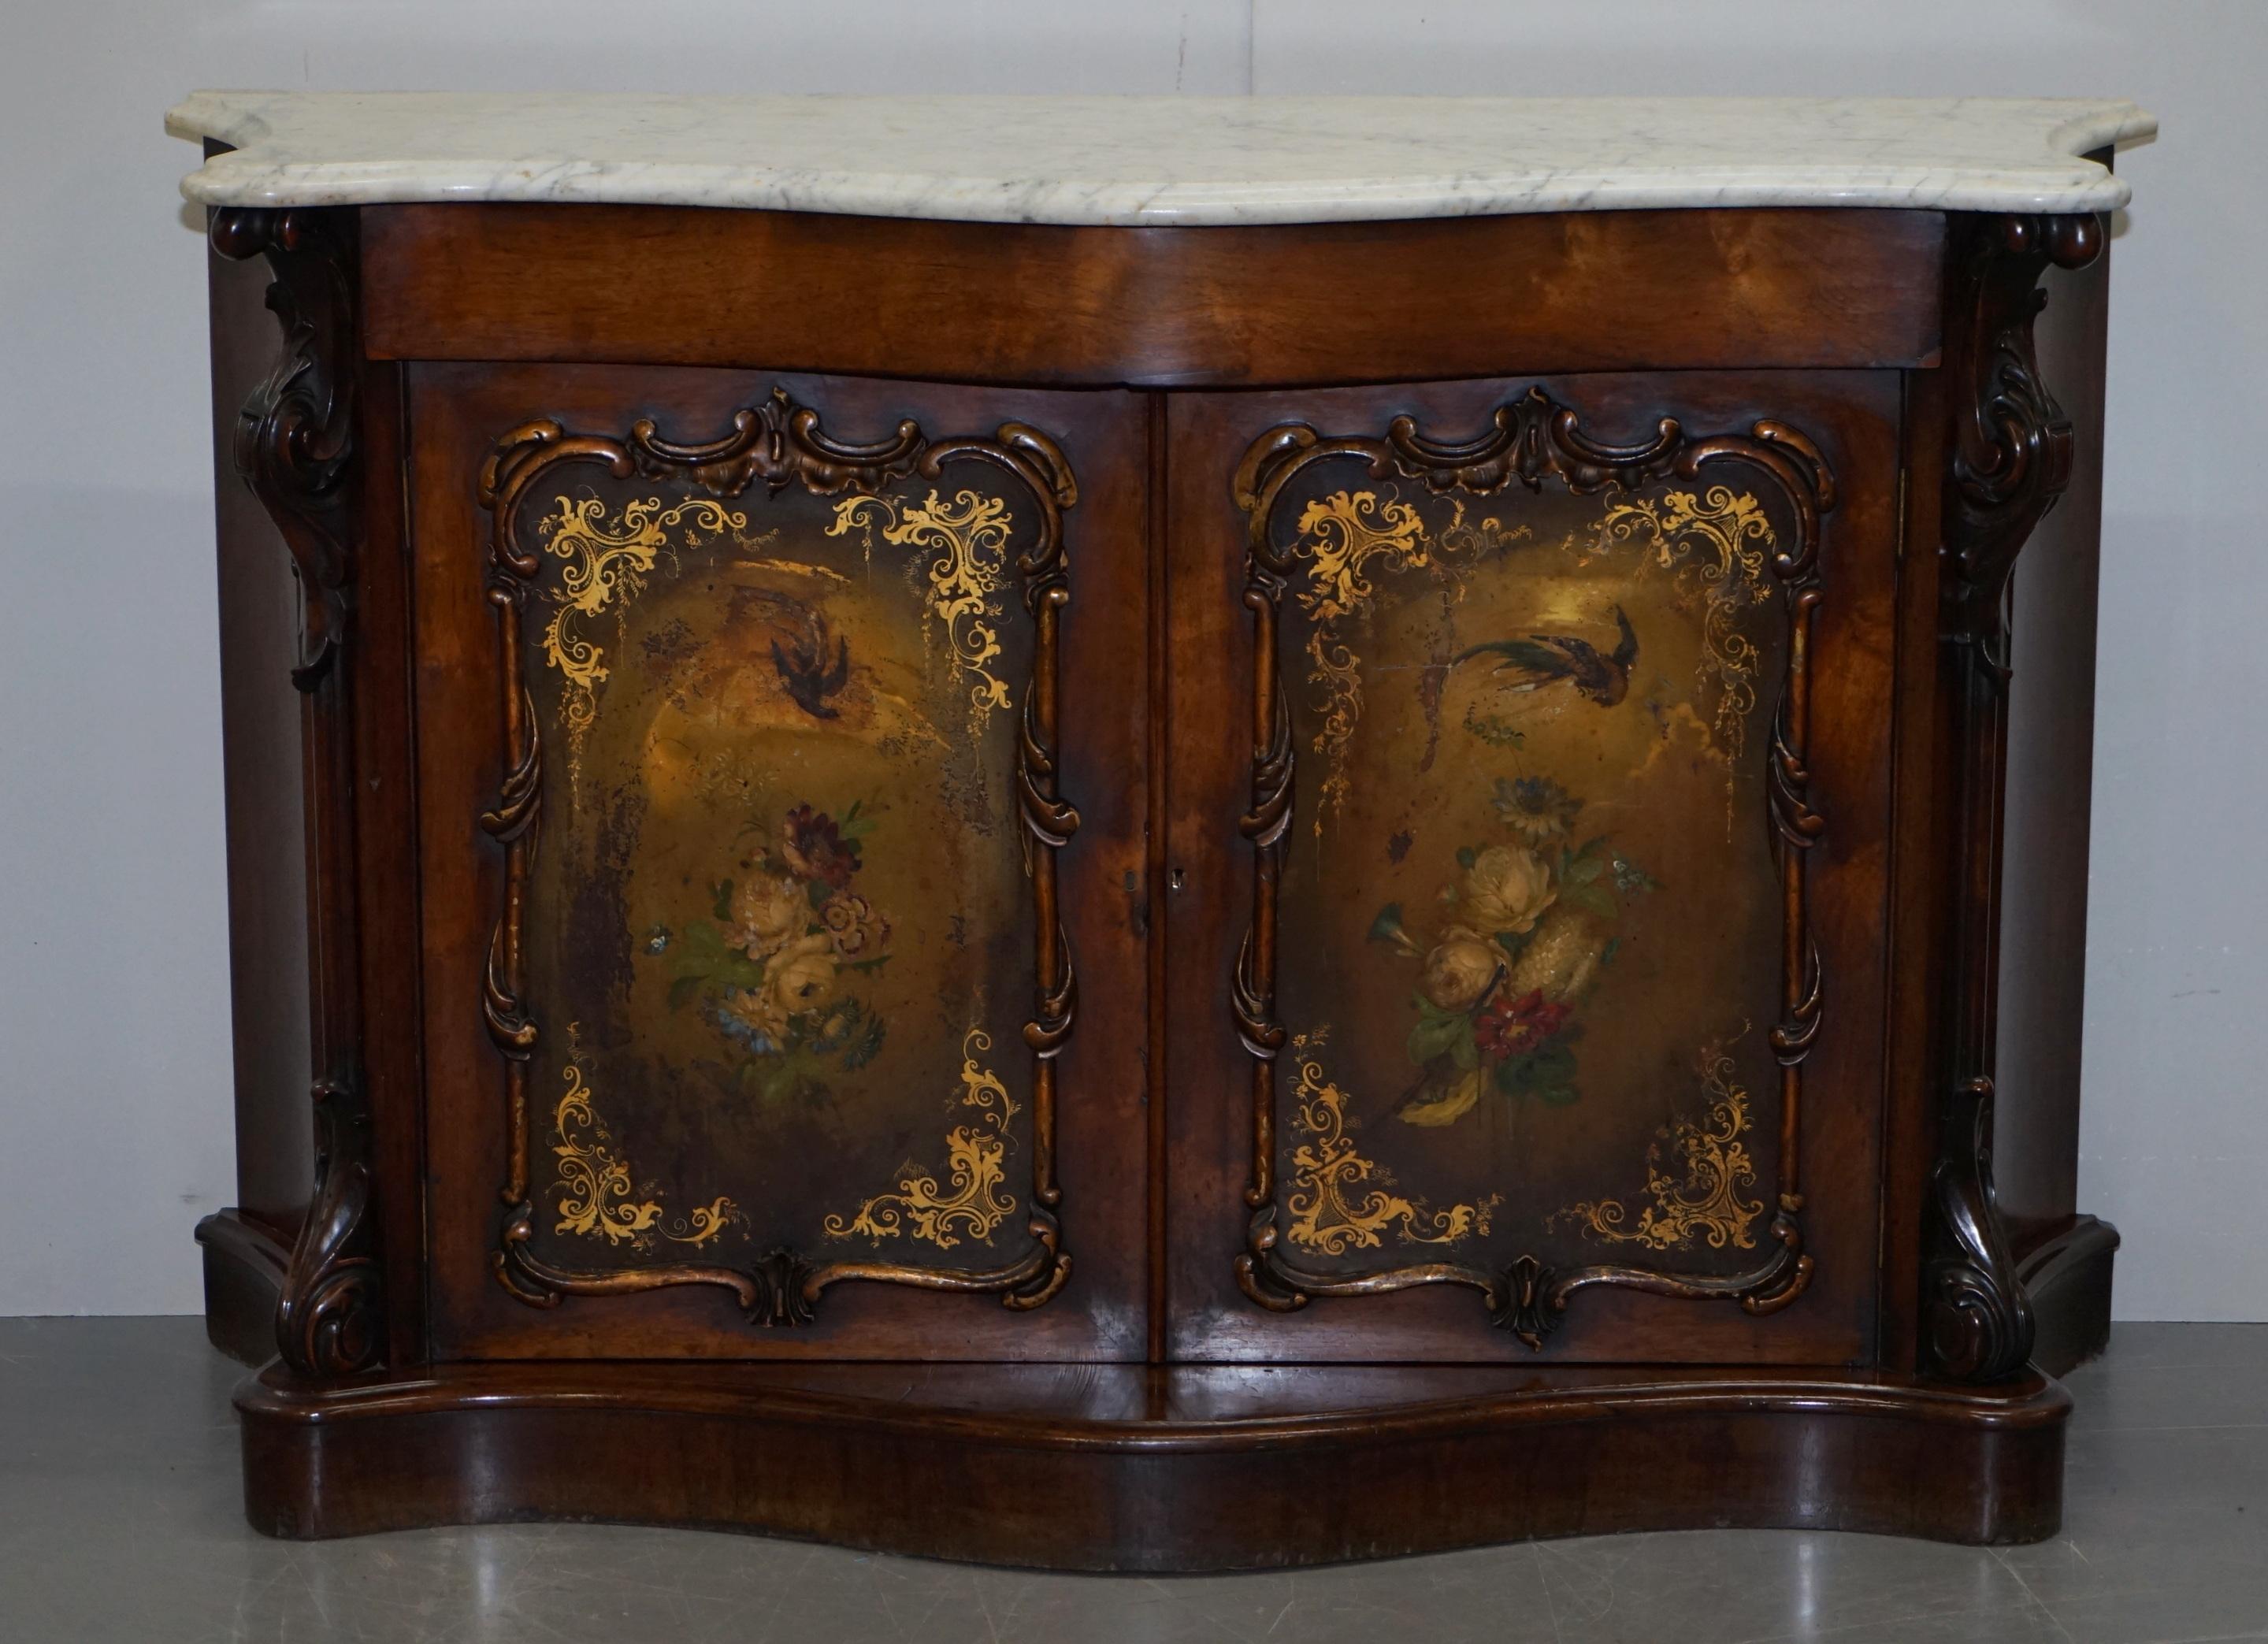 We are delighted to offer for sale this sublime Victorian circa 1860 walnut serpentine sideboard with thick marble top and Verdi Martin style paintings 

This has to be one of the most beautiful sideboards on the market today, the carving is truly